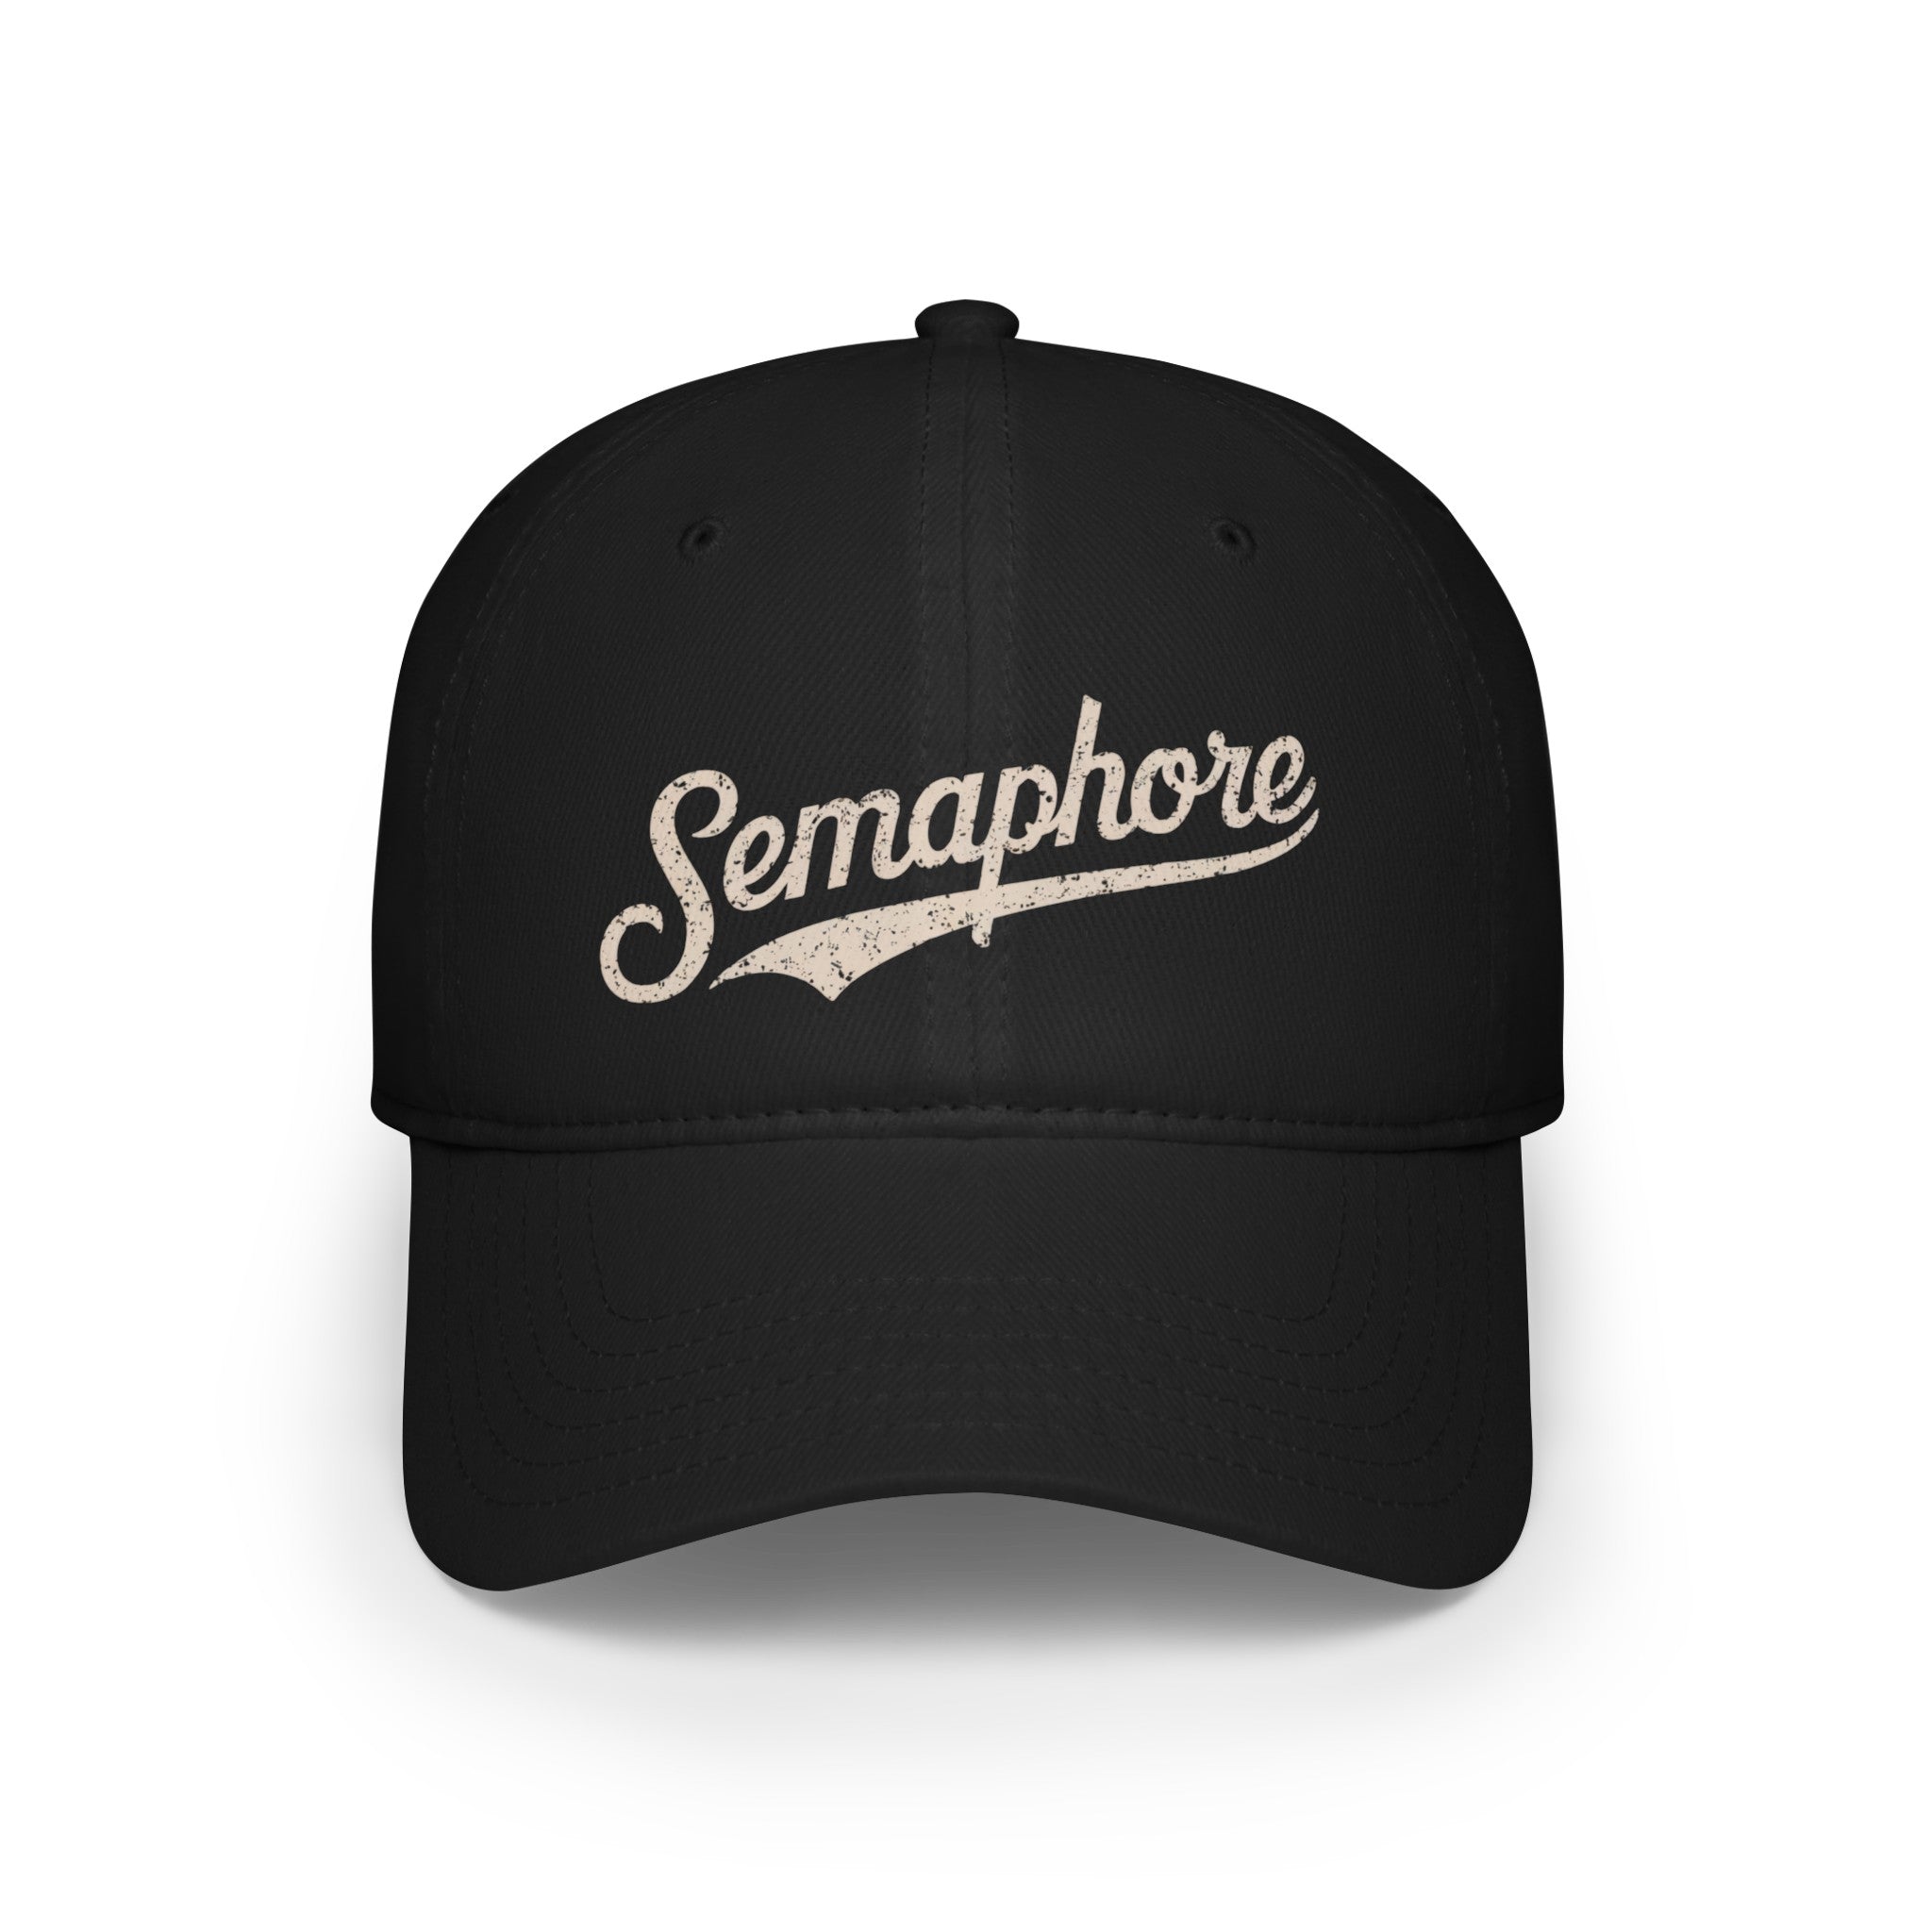 A black Semaphore - Hat featuring the word "Semaphore" written in a stylized white script across the front, showcasing Semaphore designs for lasting durability.